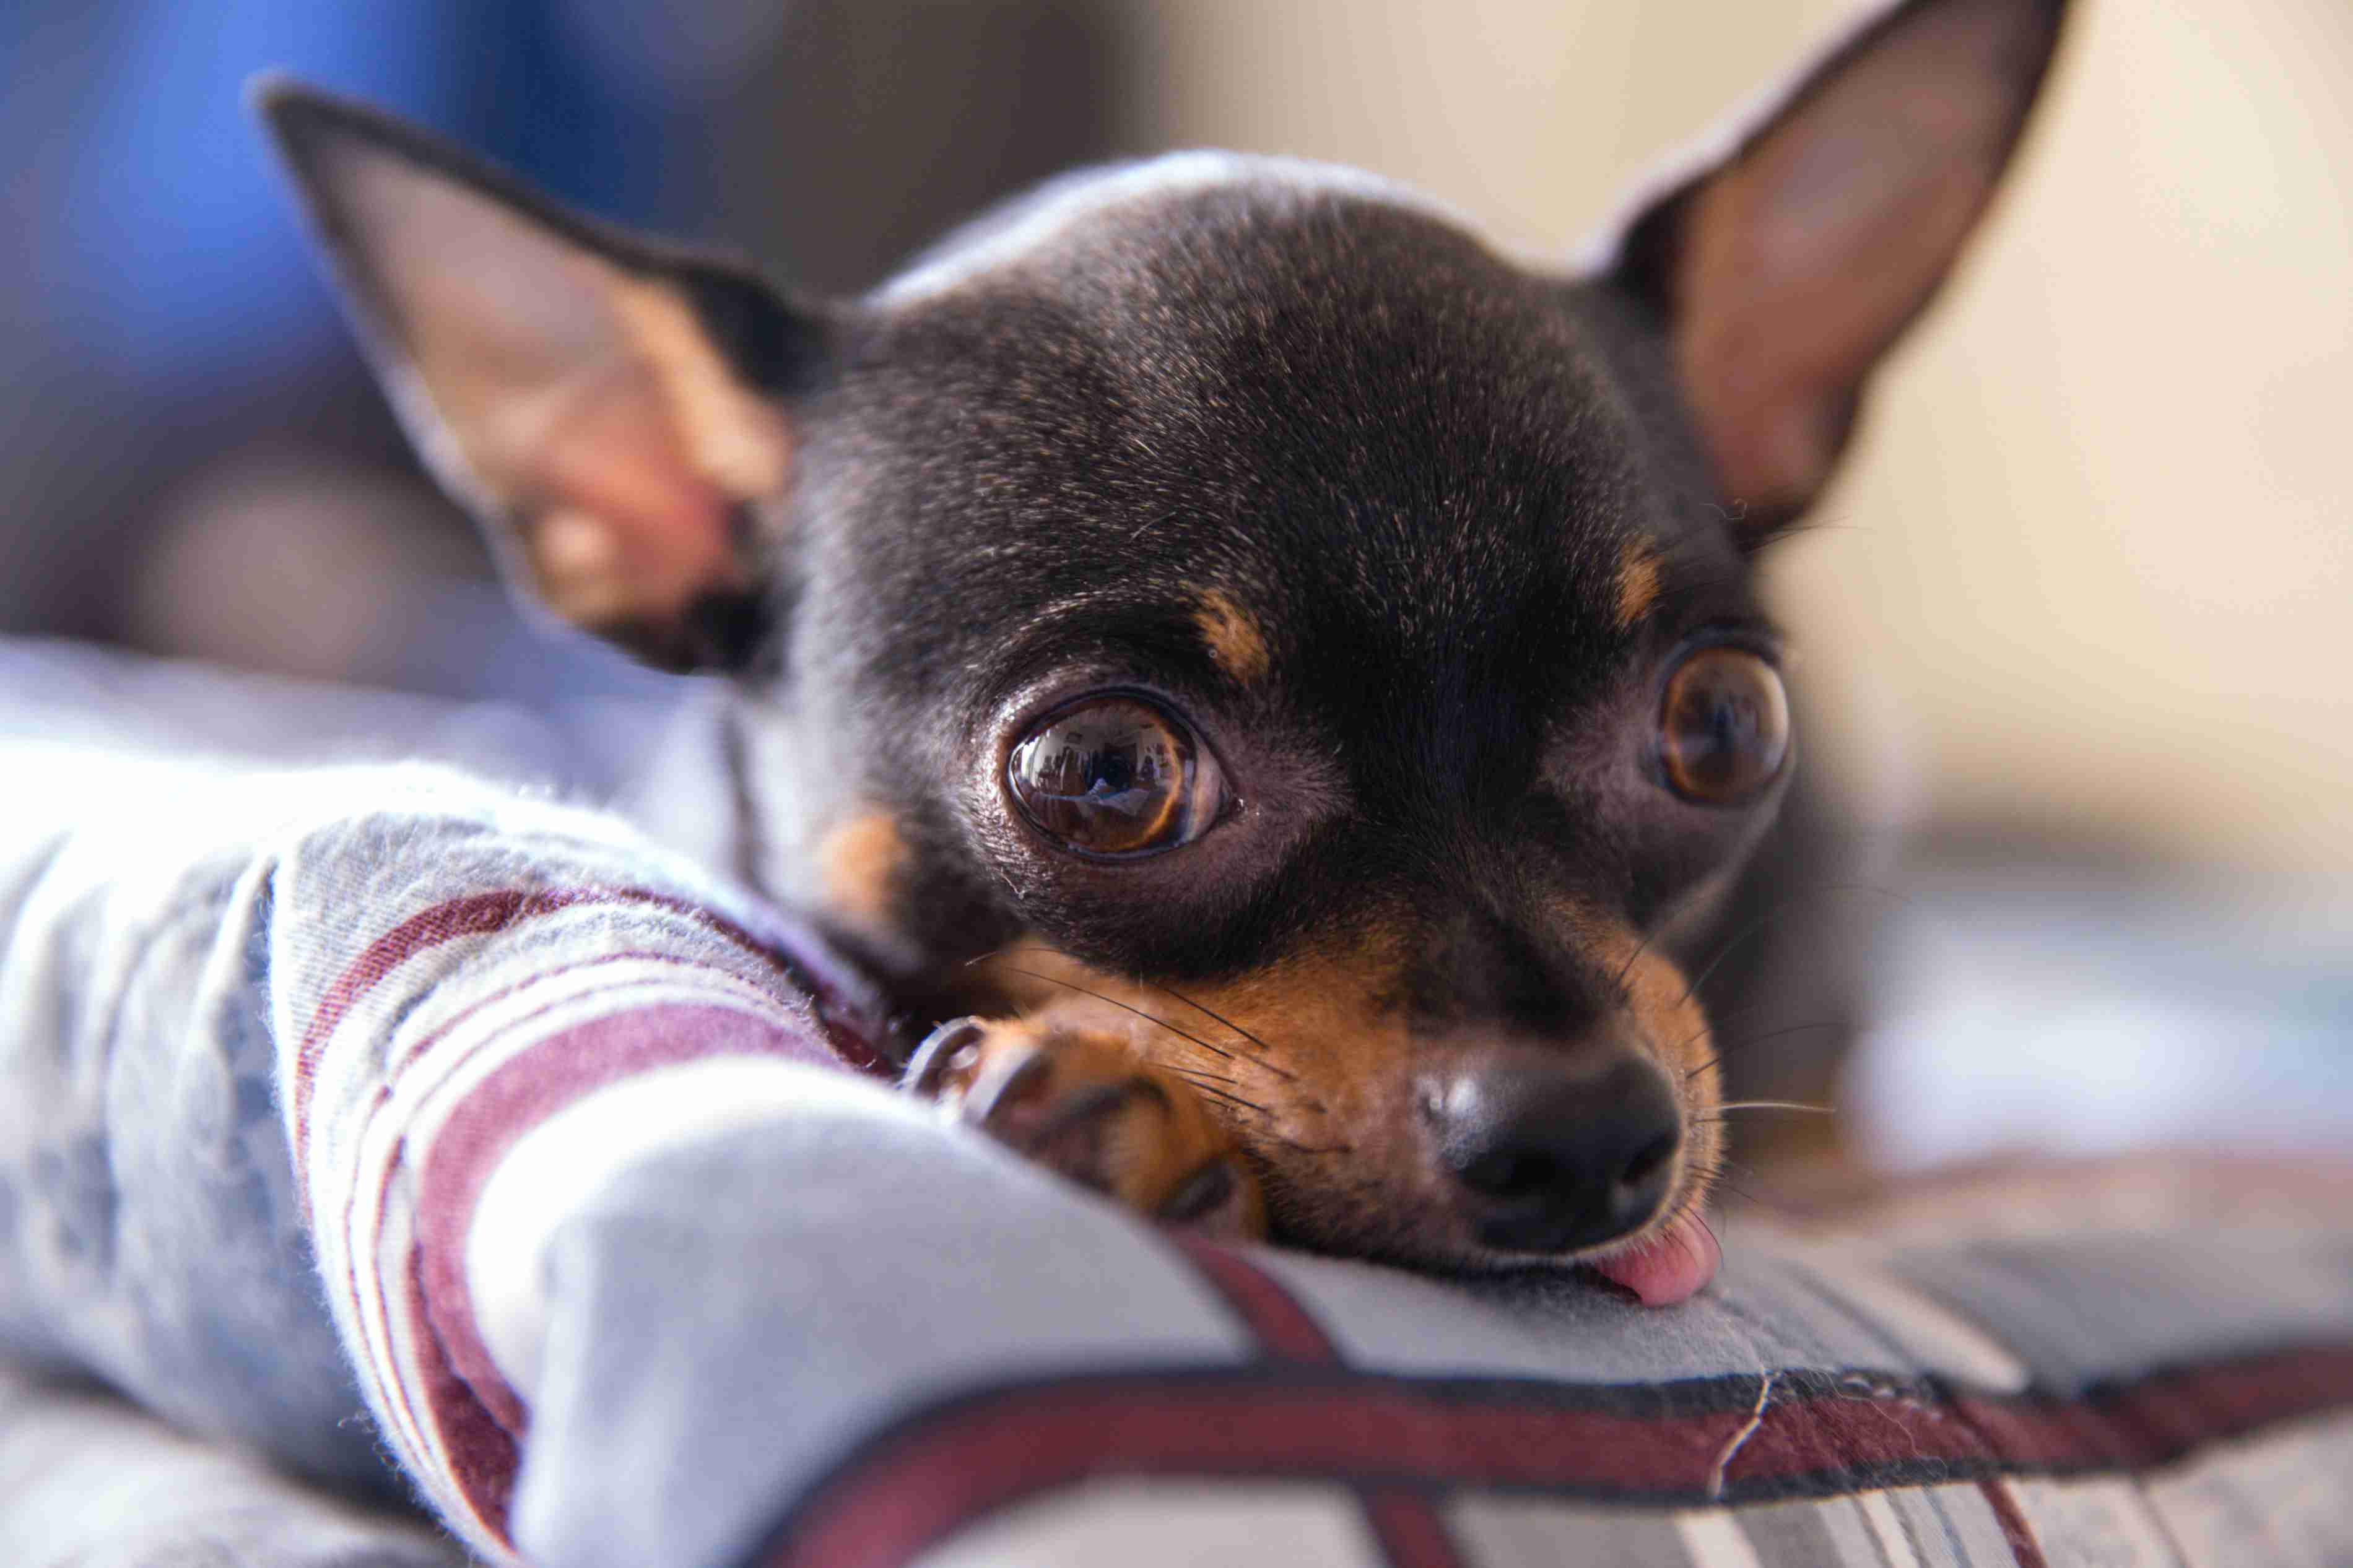 Can a Chihuahua's anger issues be resolved with time and patience?